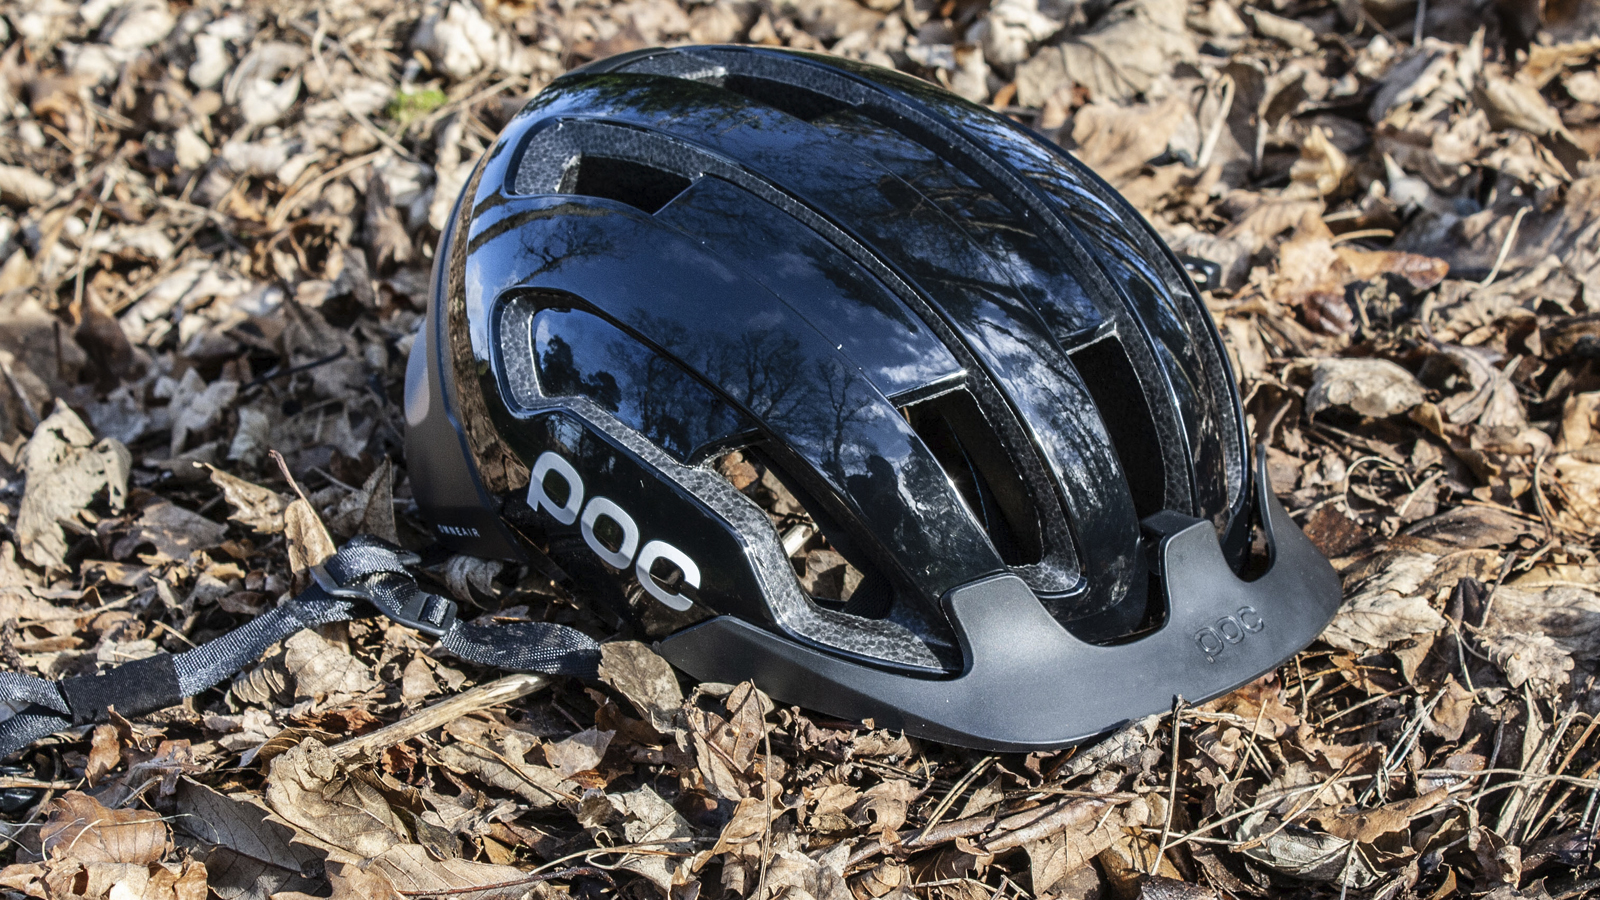 POC Omne Air Resistance Spin helmet review | BikePerfect